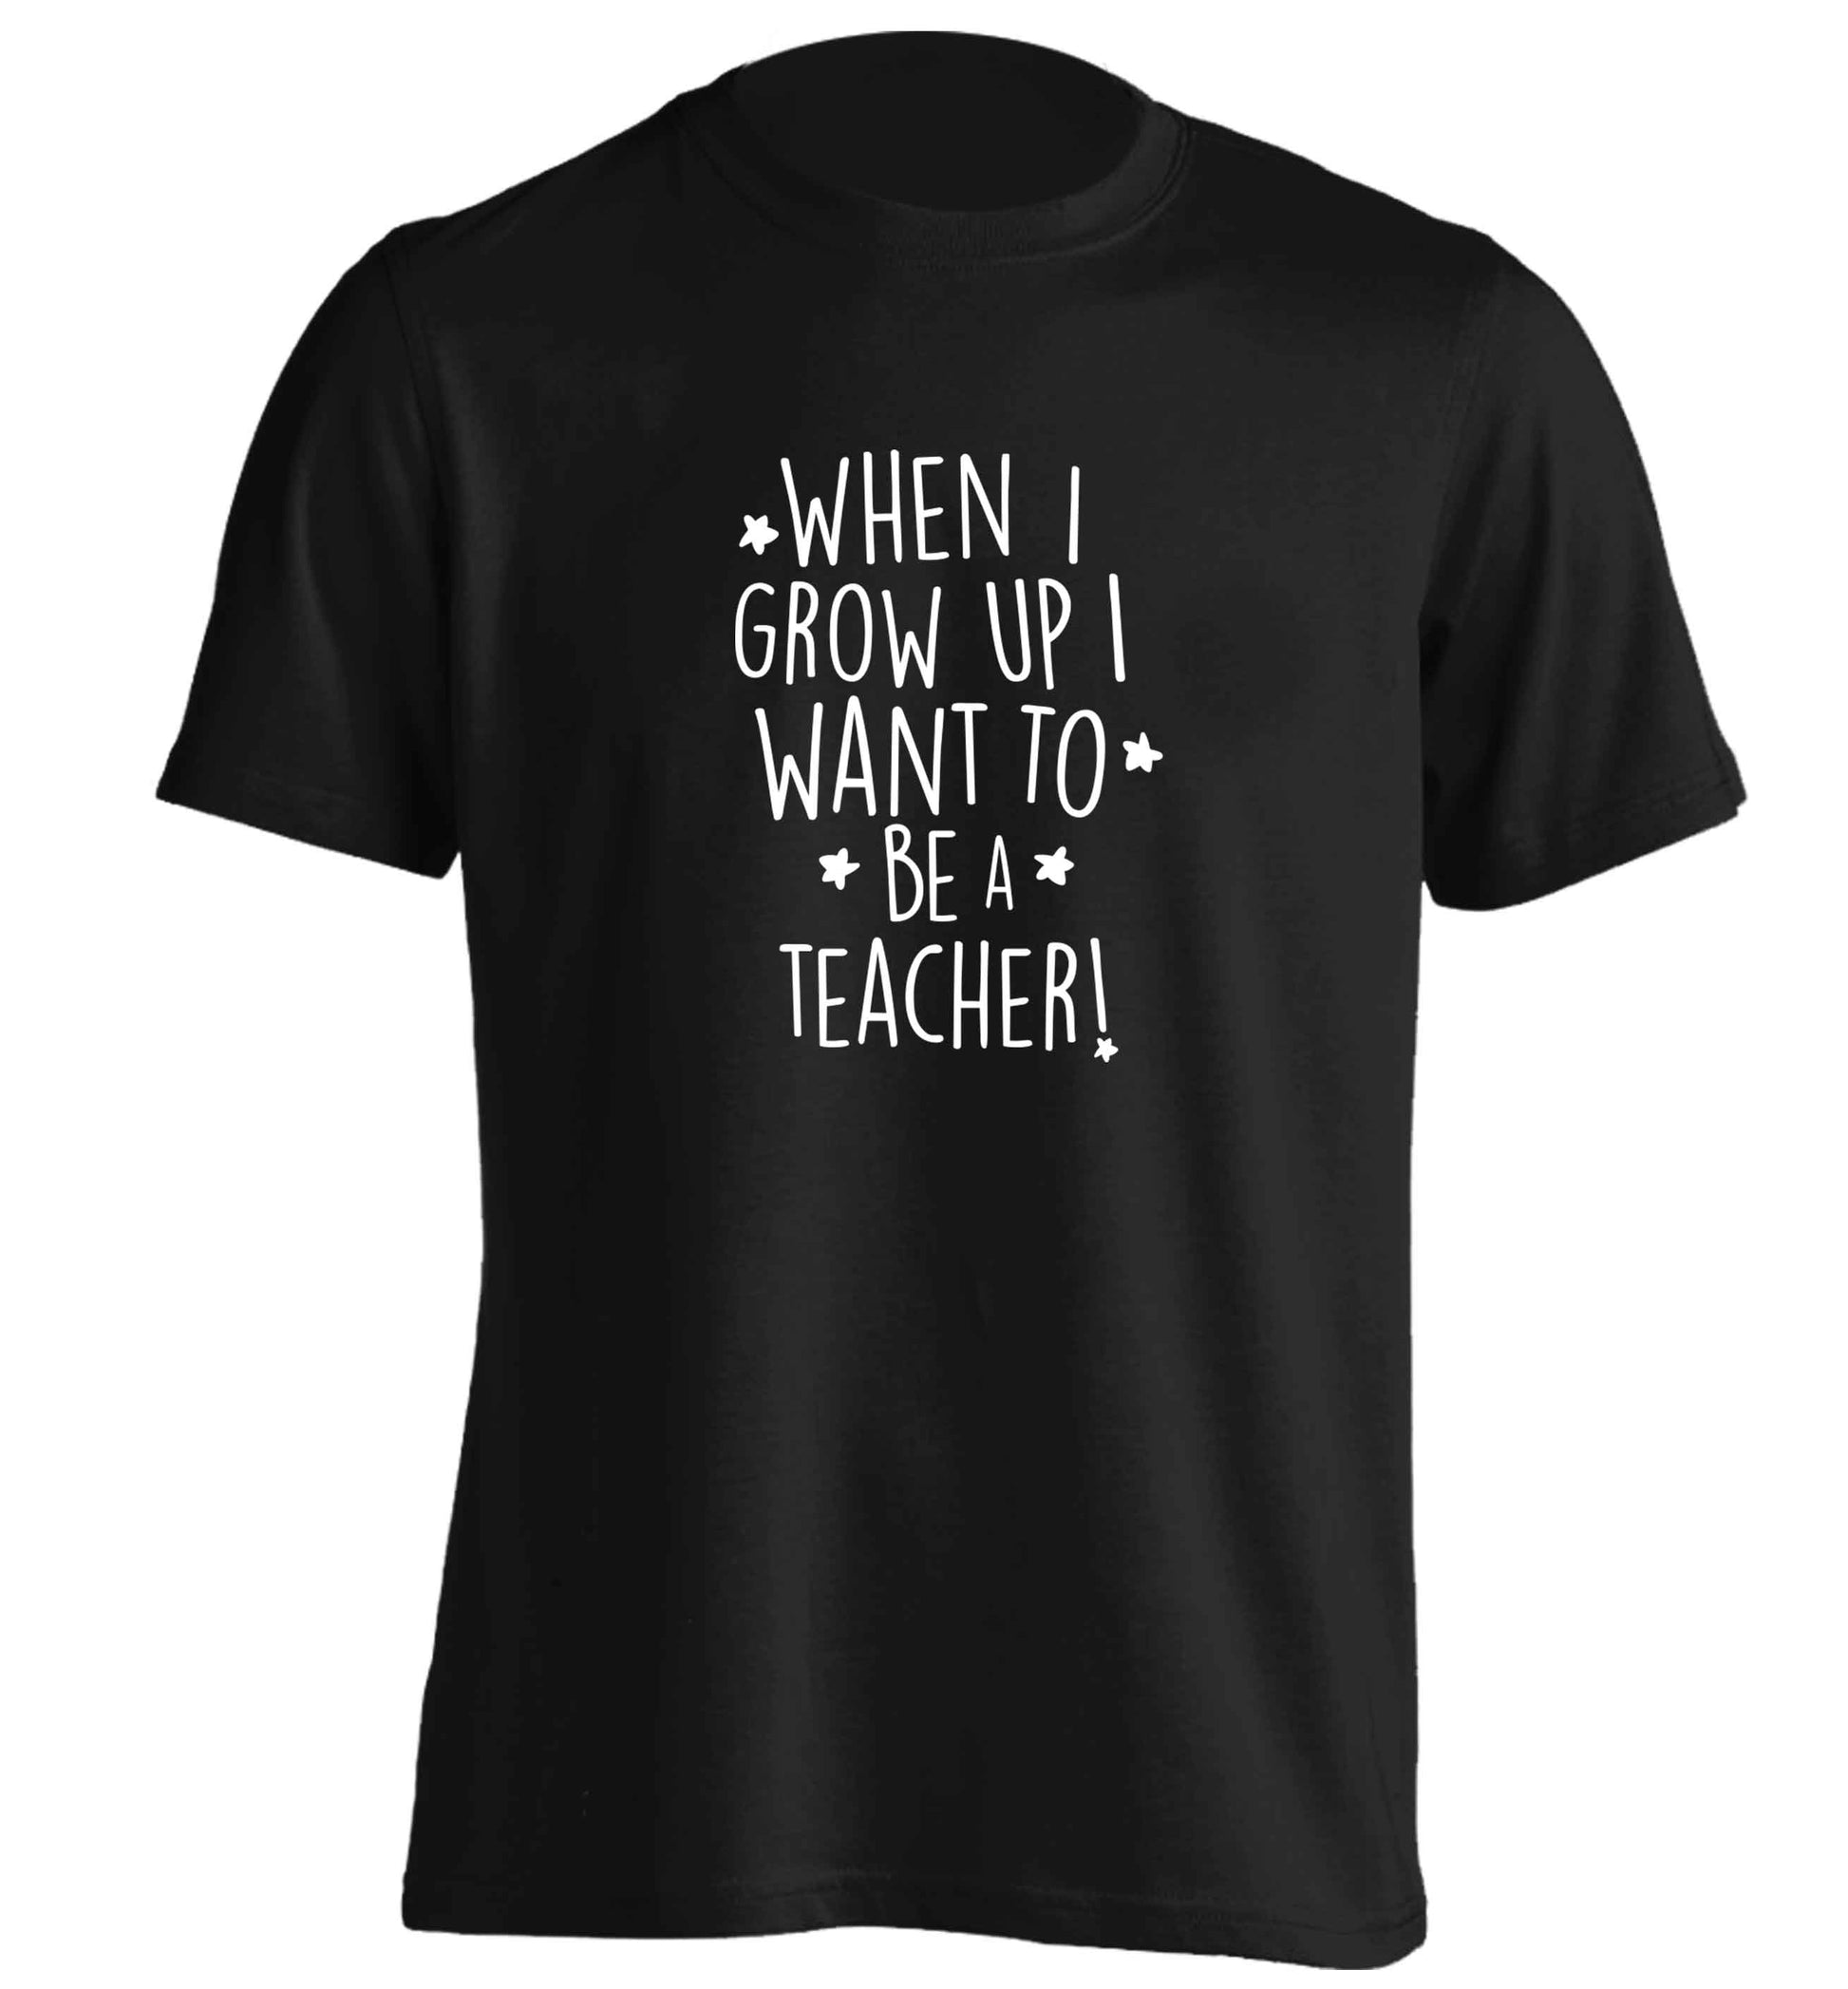 When I grow up I want to be a teacher adults unisex black Tshirt 2XL